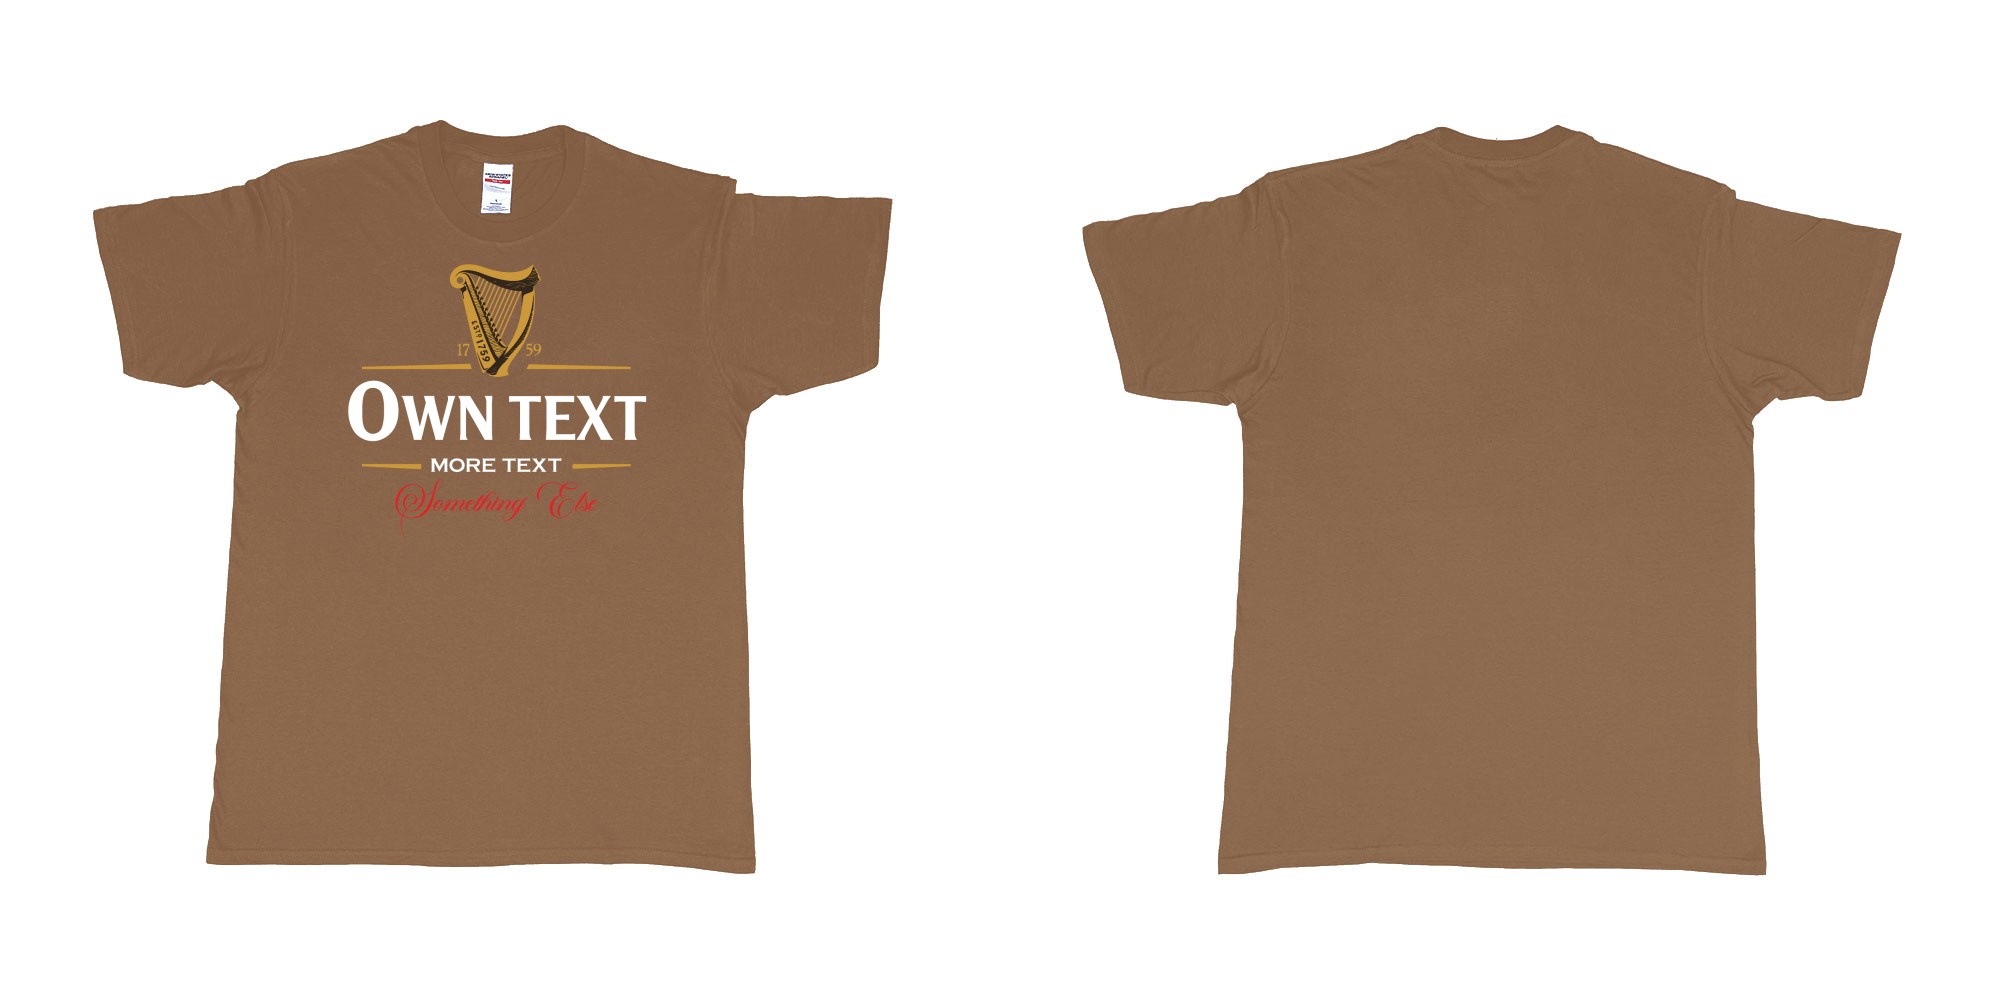 Custom tshirt design guinness beer custom text teeshirt printing in fabric color chestnut choice your own text made in Bali by The Pirate Way